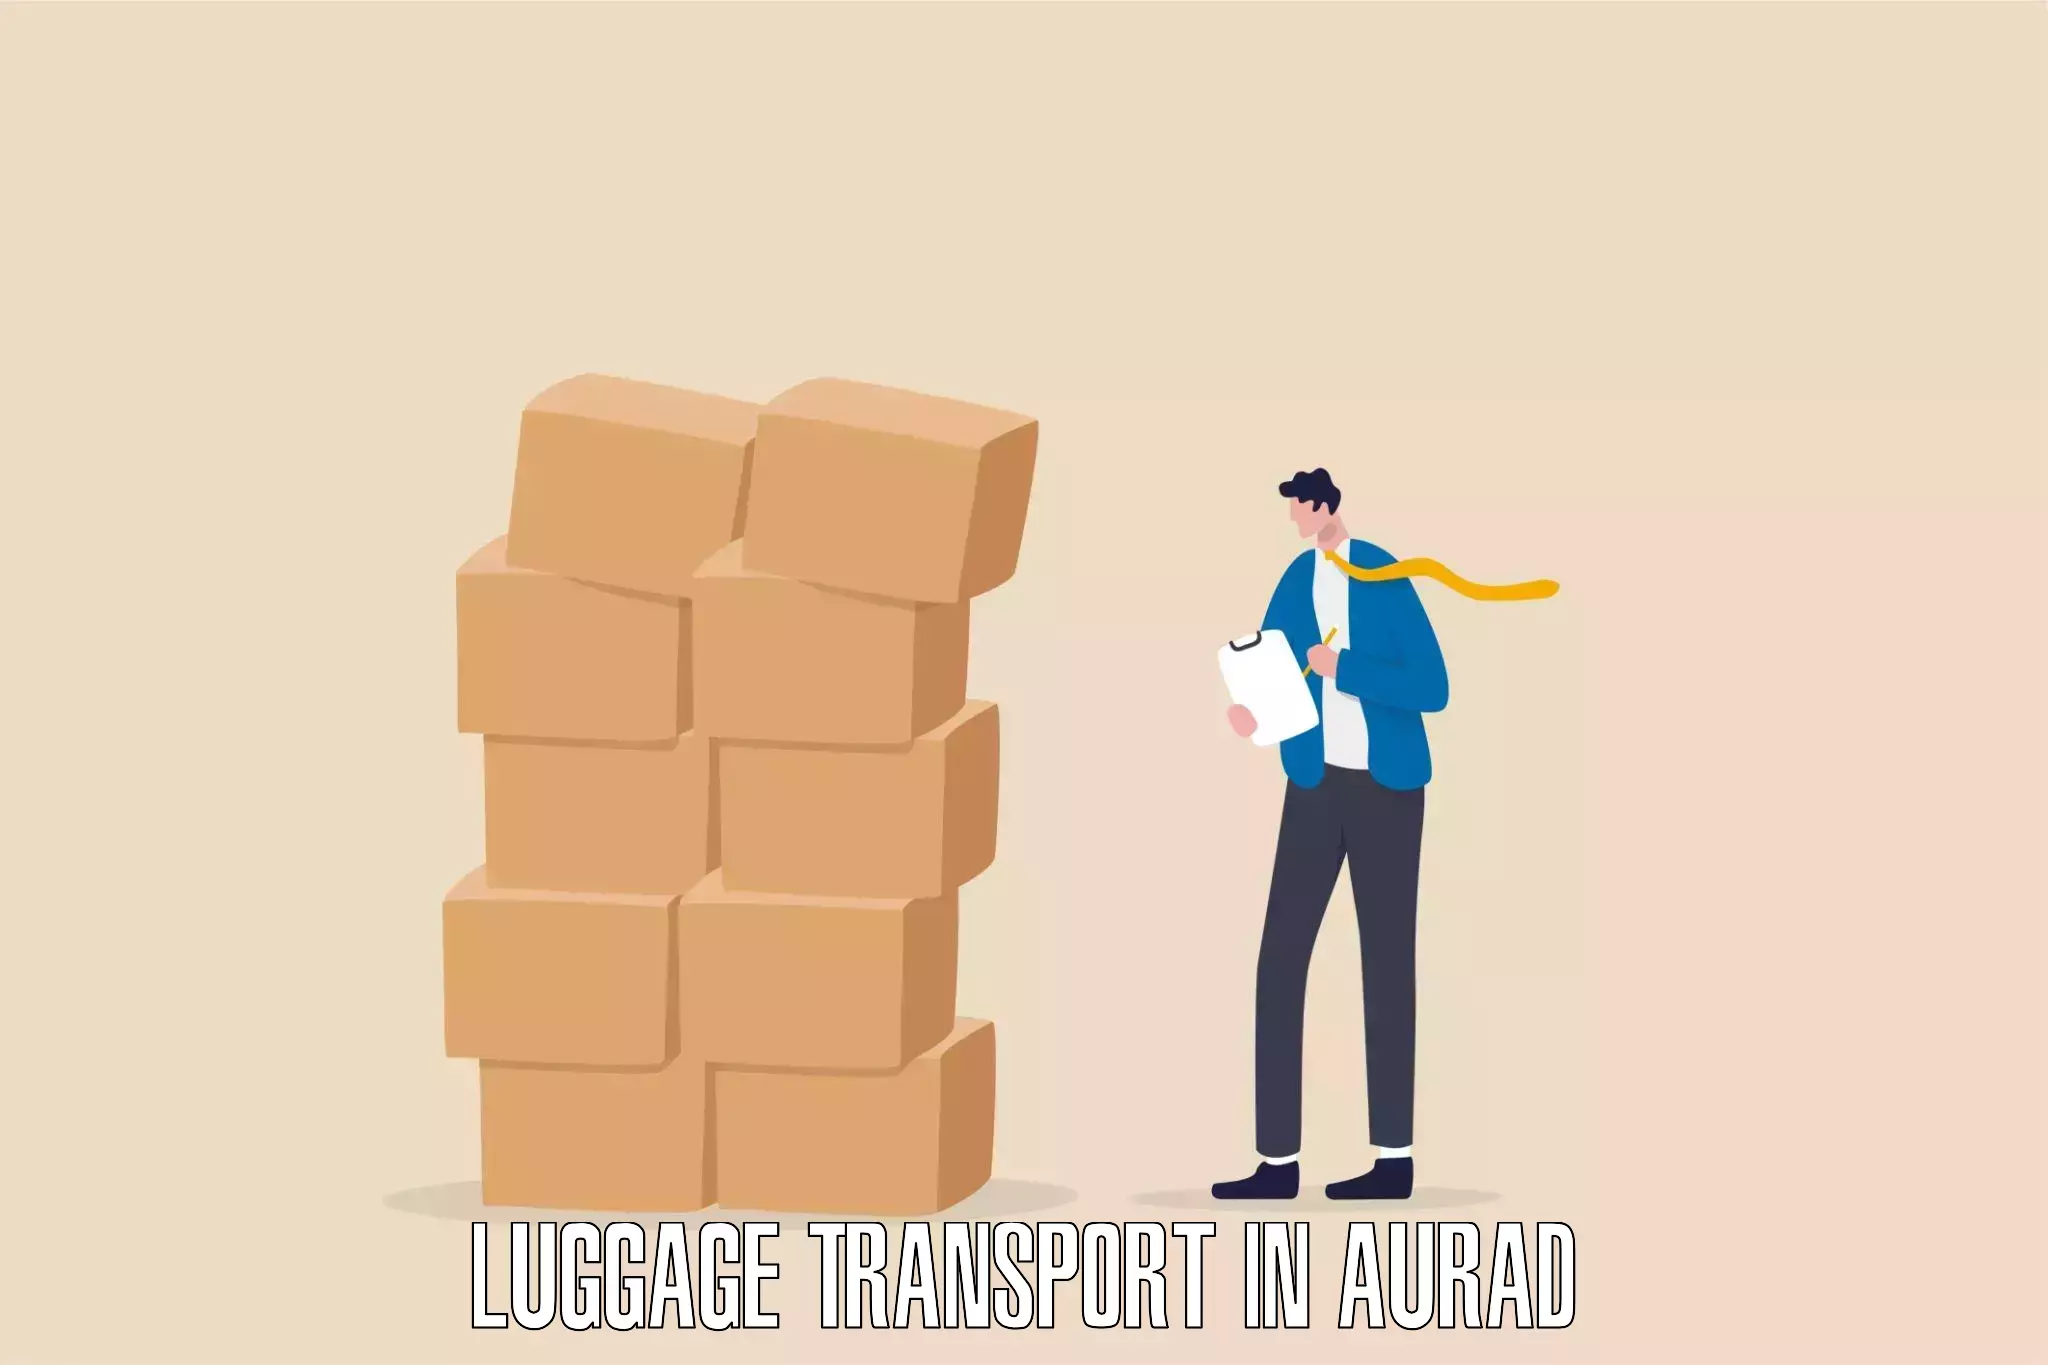 Luggage shipping trends in Aurad